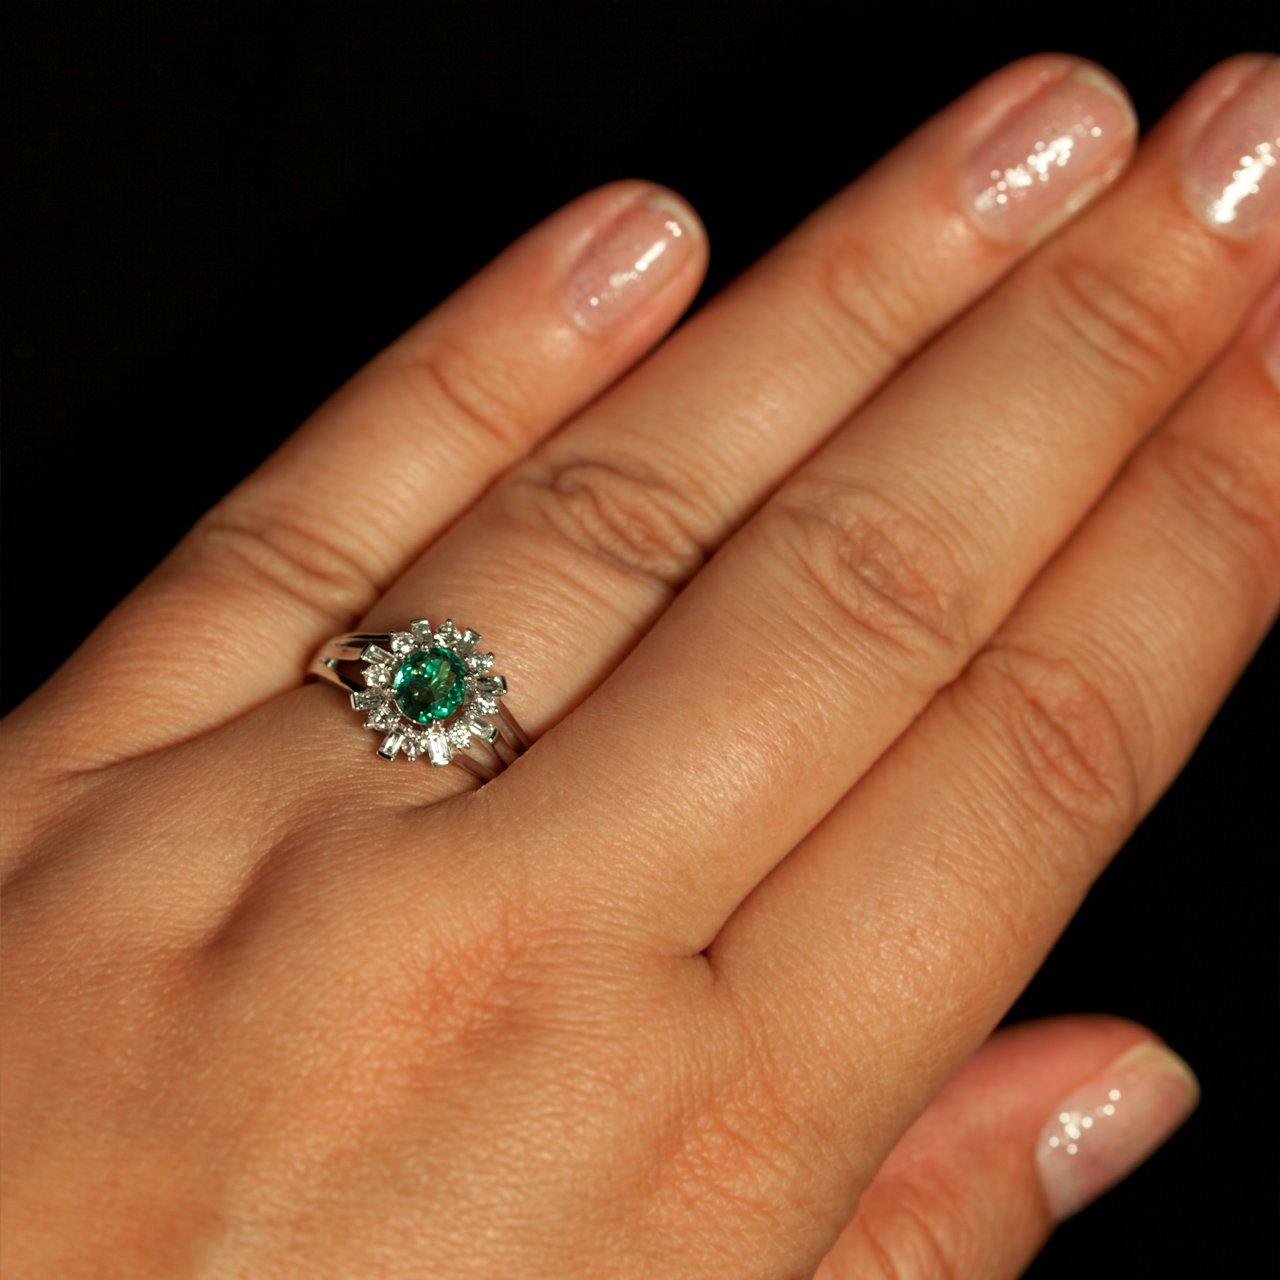 Close-up of a woman's hand displaying a 0.78ct alexandrite platinum ring with diamond accents